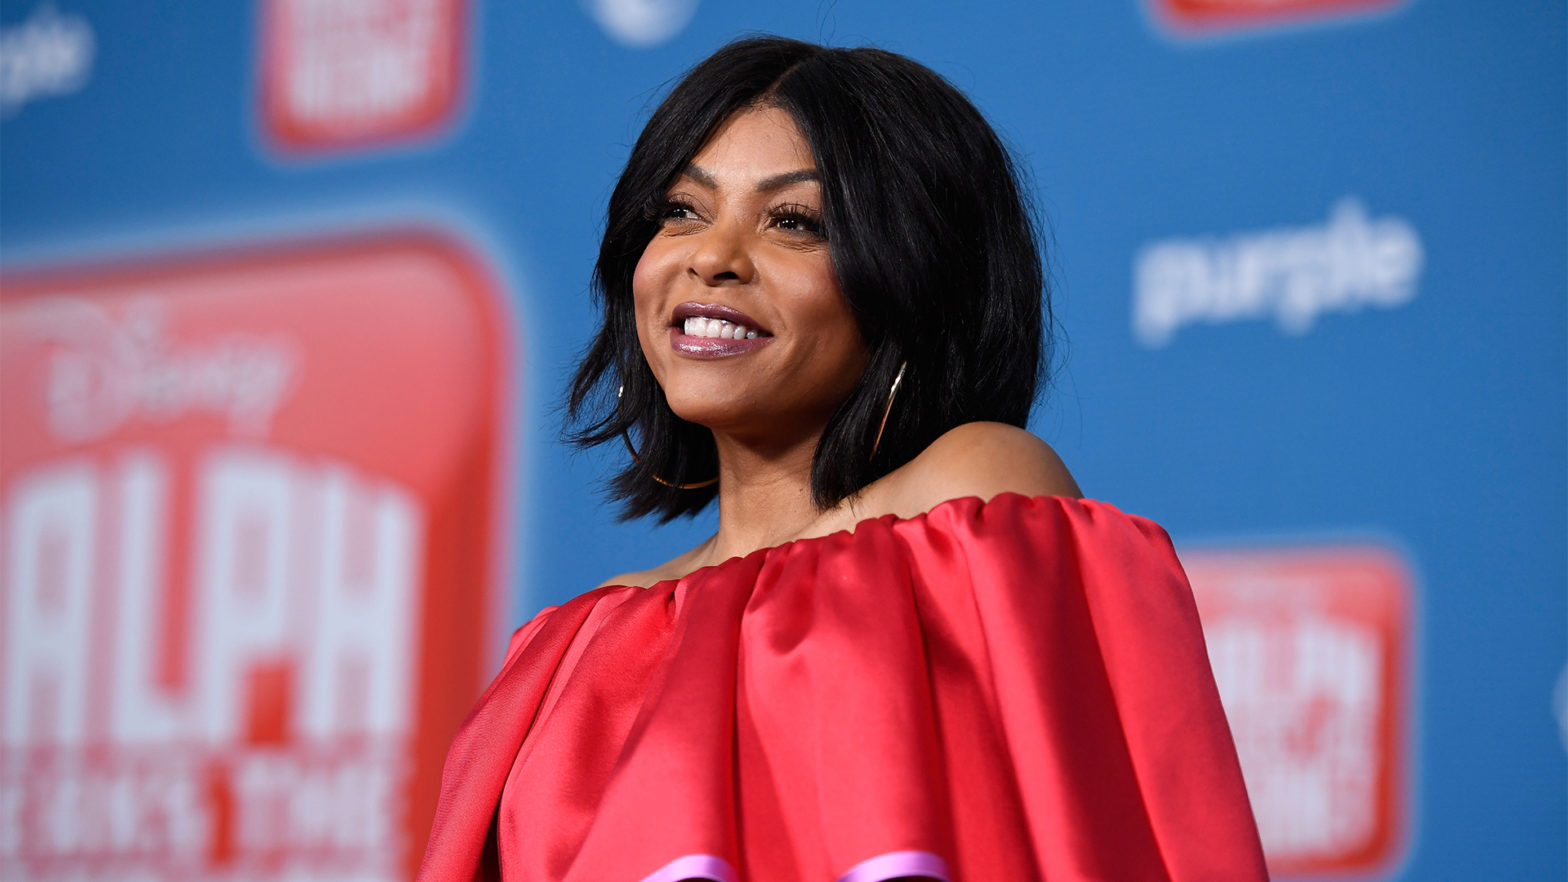 How Taraji P. Henson Went From $700 And A Dream To A Whopping $25M Net Worth